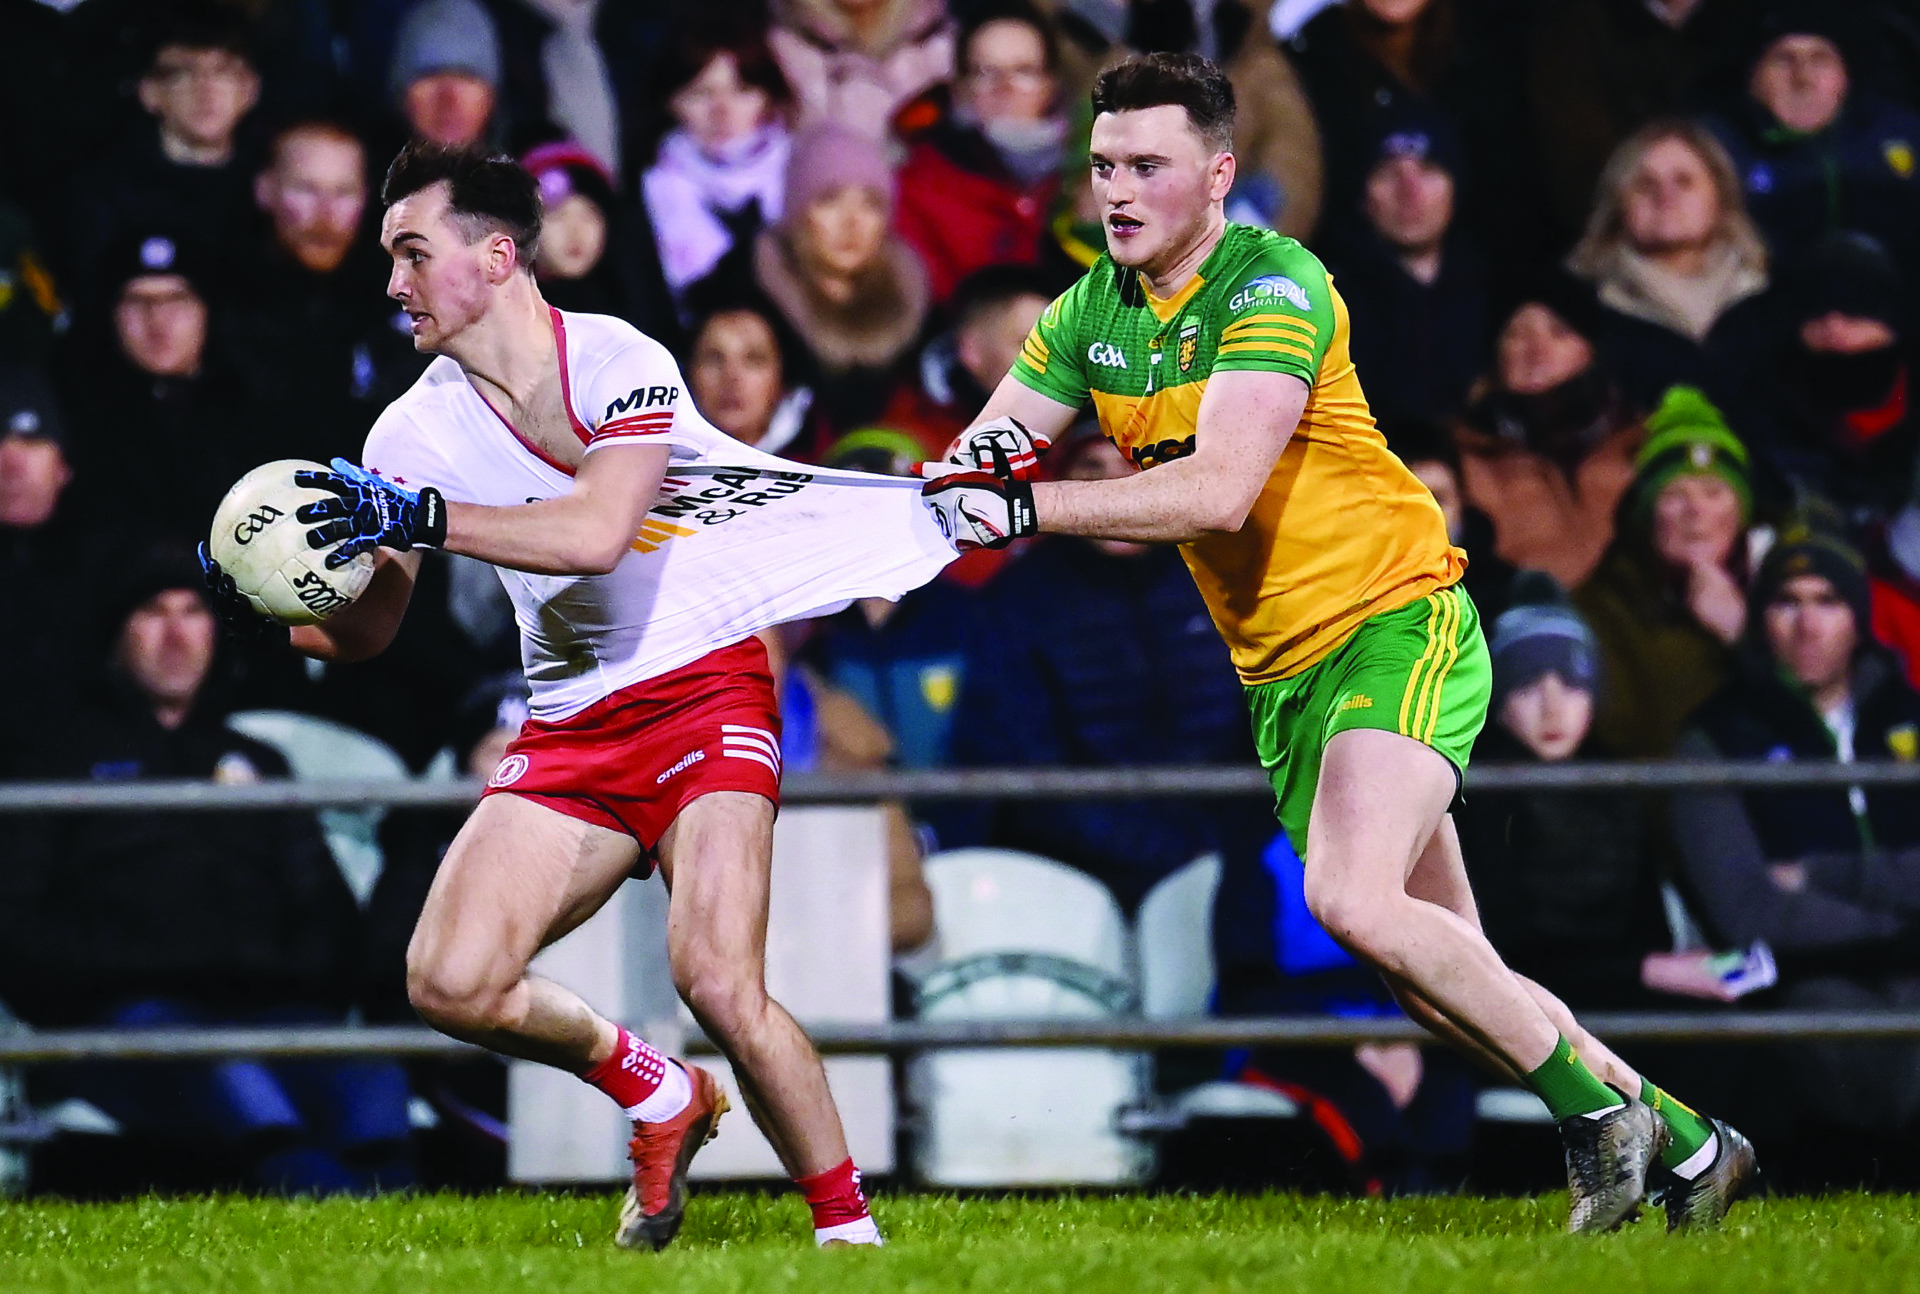 Donegal manager looking forward to Tyrone challenge